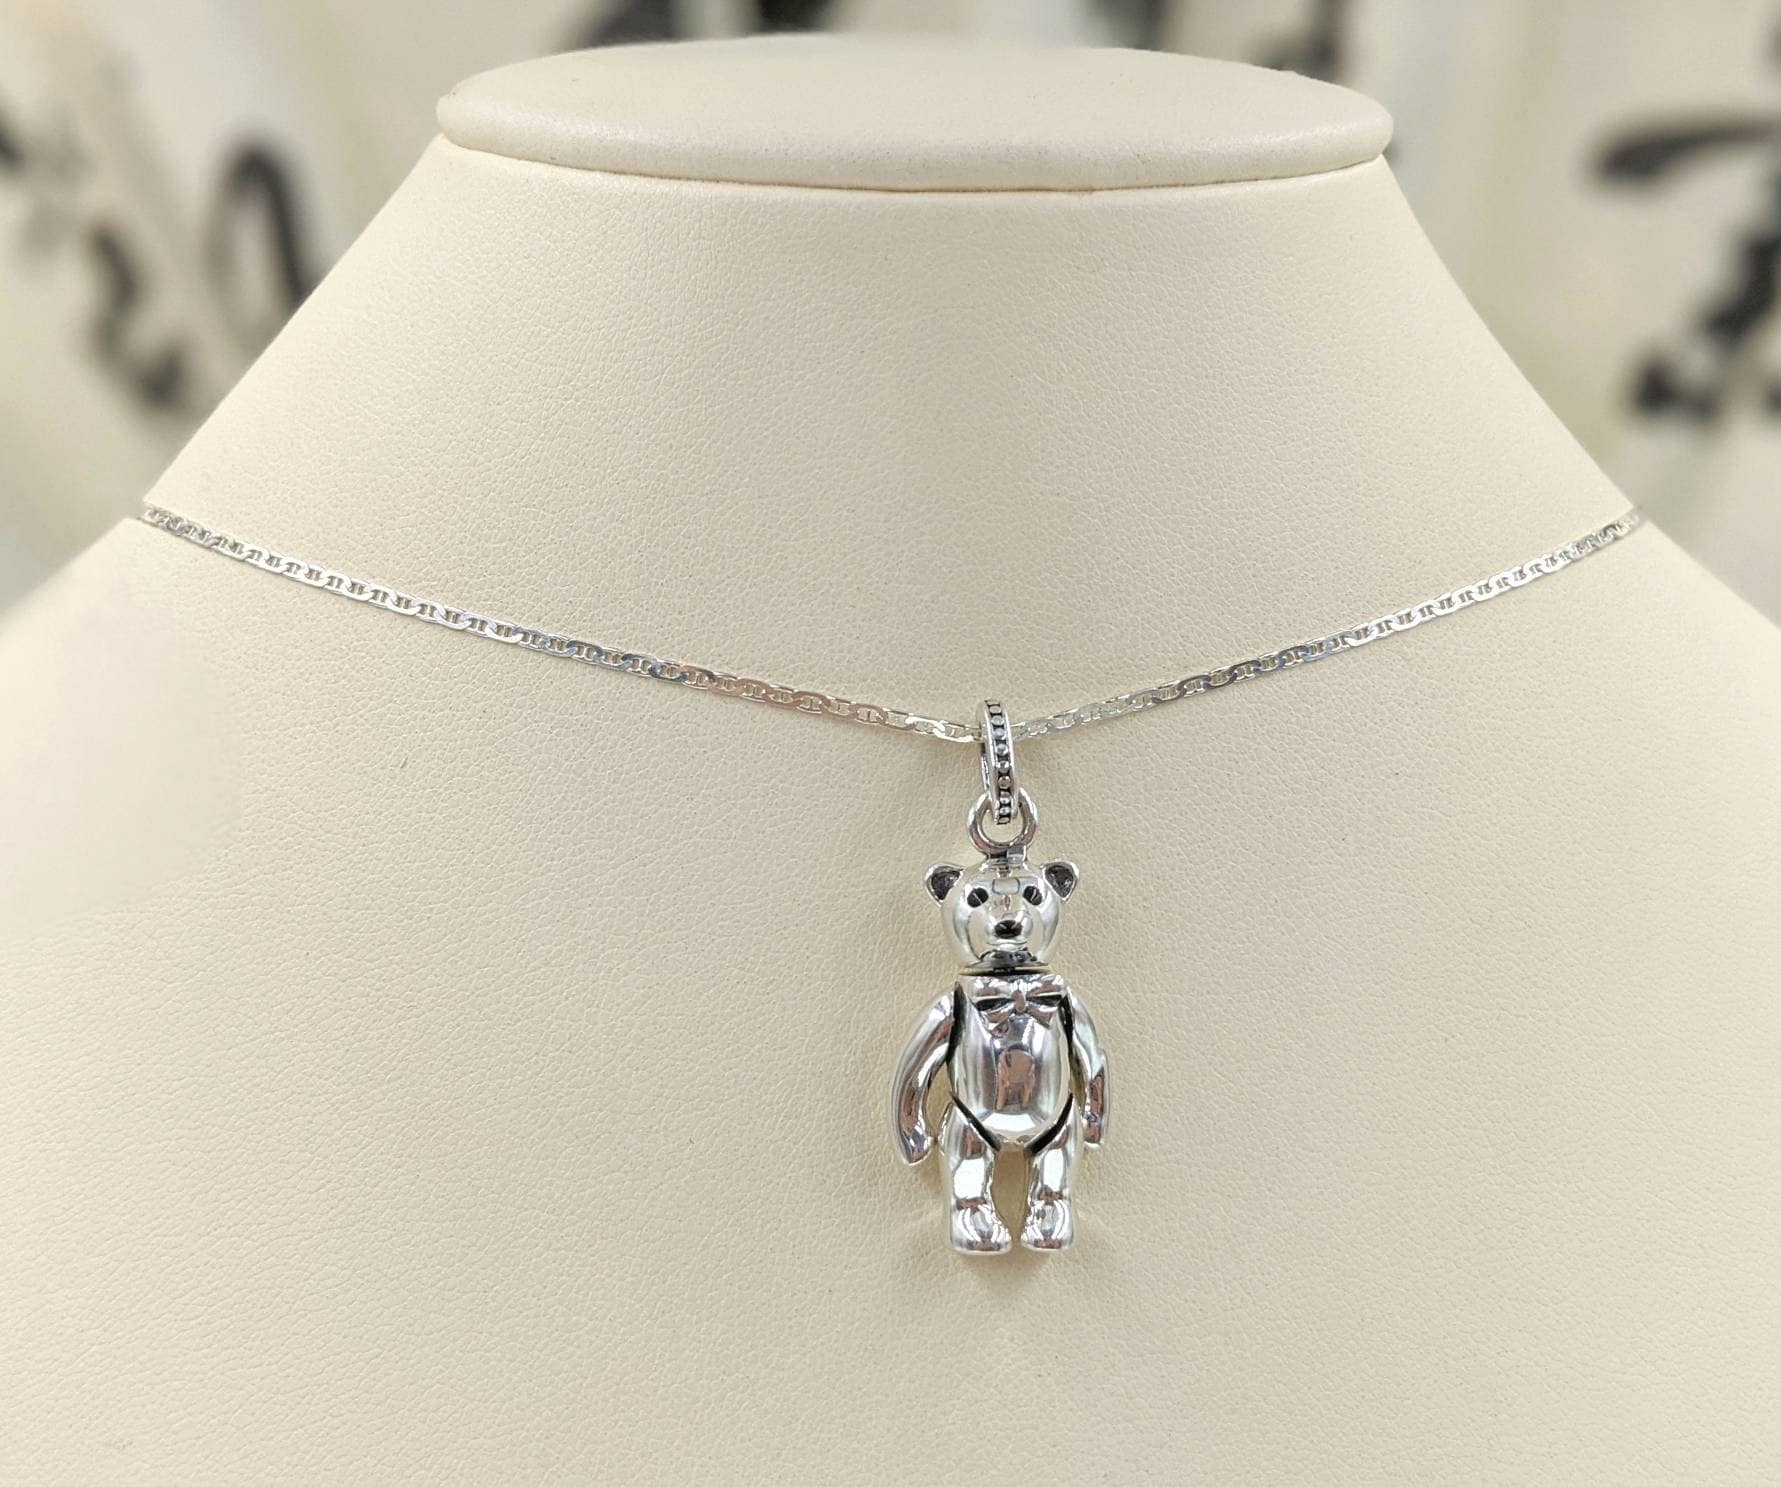 Moving Teddy Bear Necklace 925 Teddy Bear Necklace Bear With L Movable  Limbs Sterling Silver Teddybear Pendant Necklace, Infinity Close - Etsy